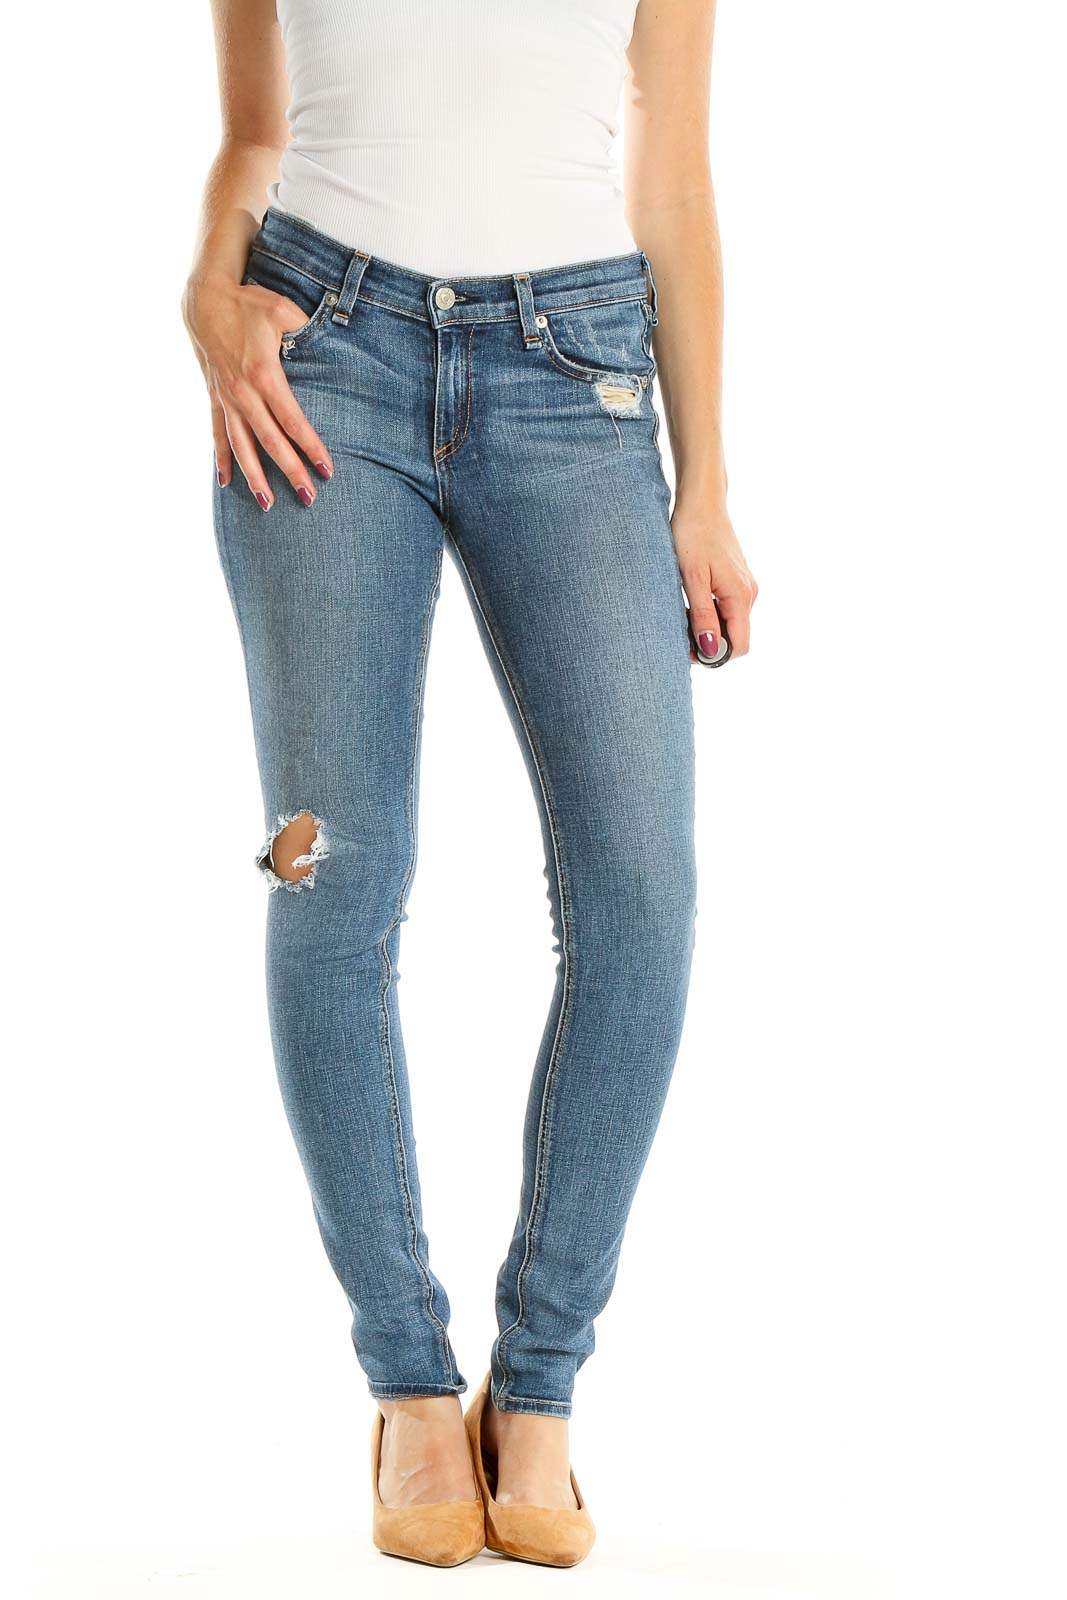 Blue Distressed Skinny Jeans Front